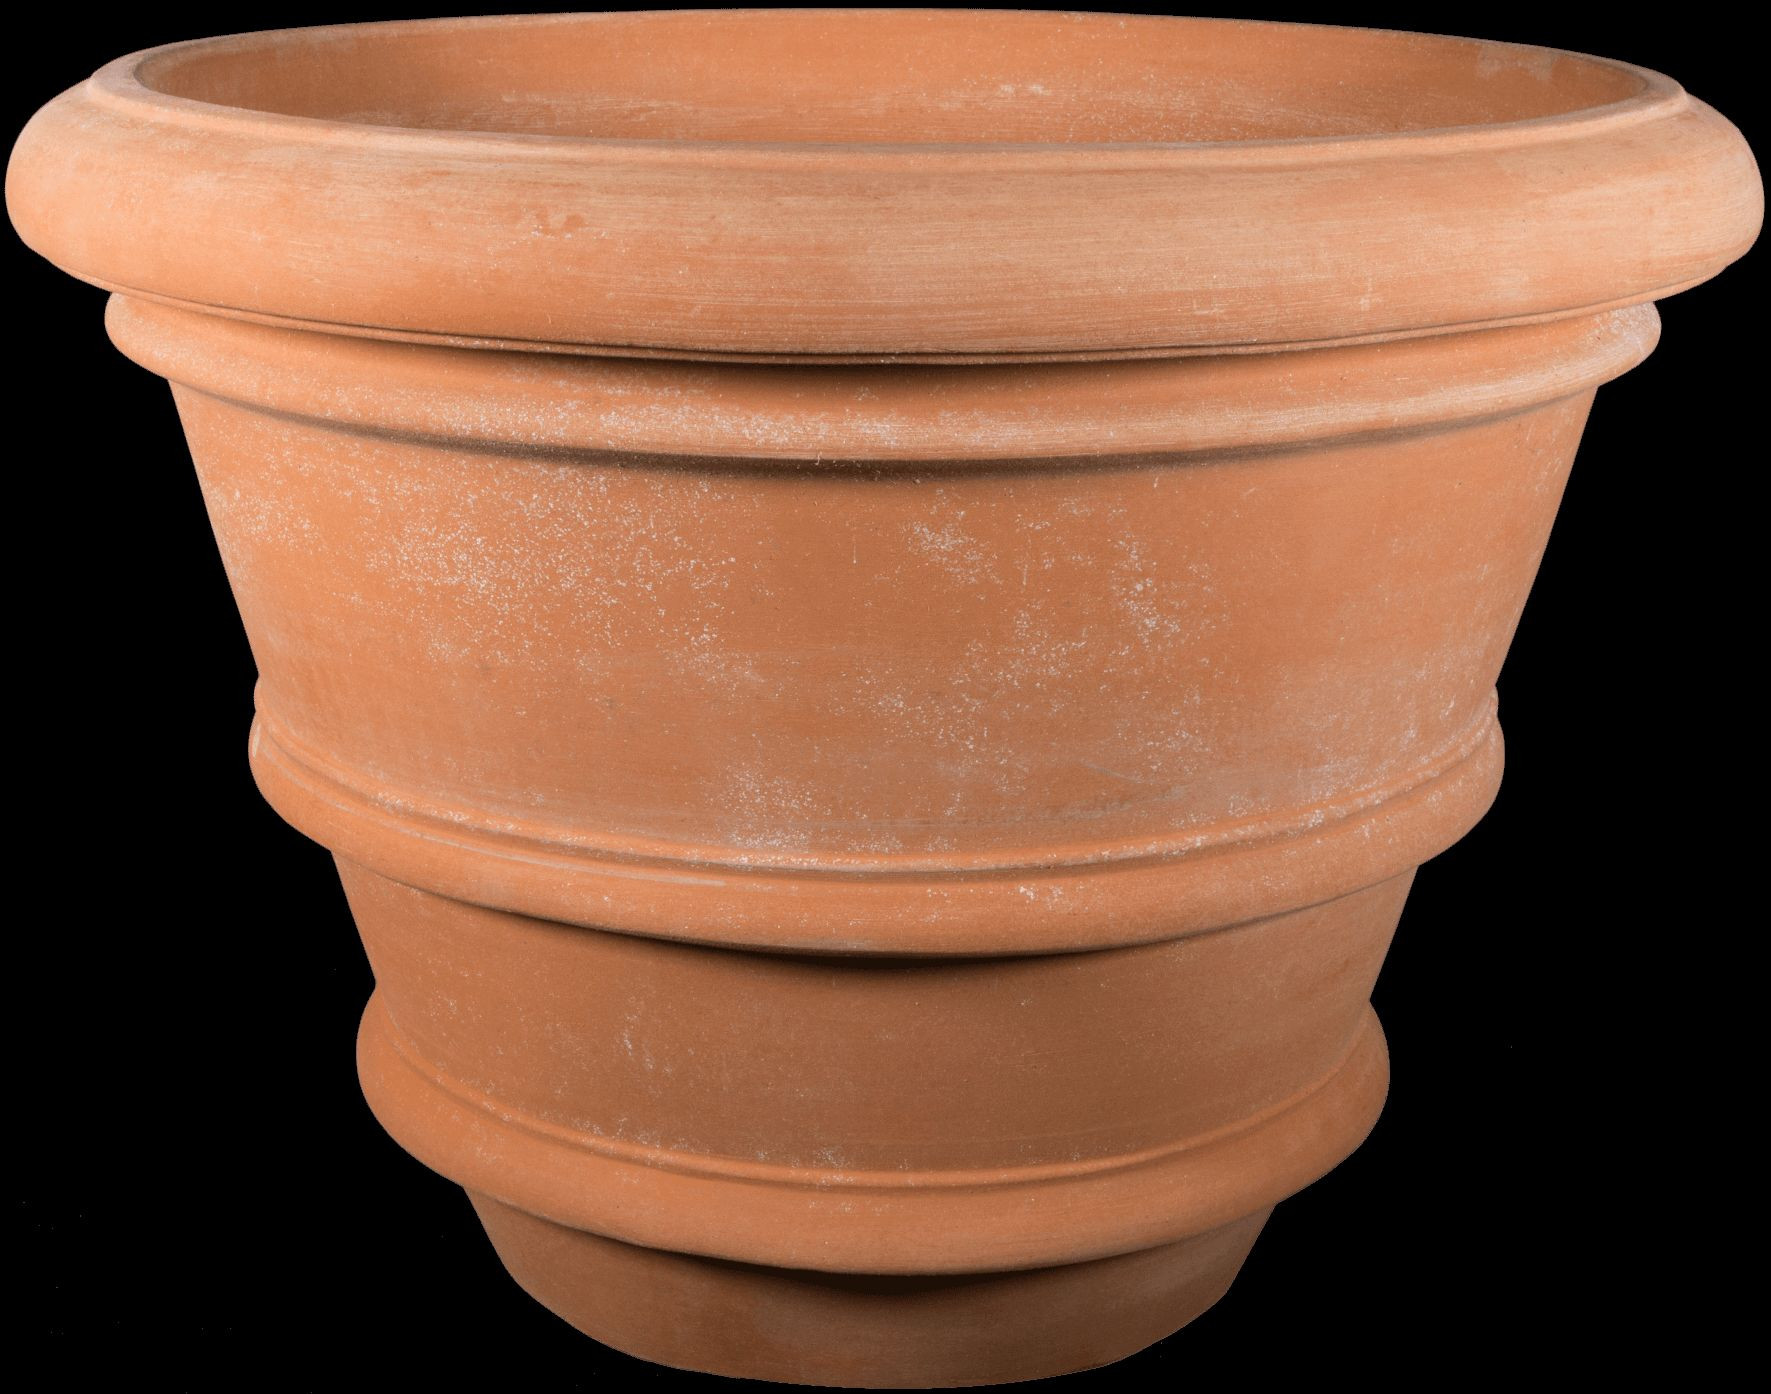 27 Wonderful Clay Floor Vase 2024 free download clay floor vase of 24 large plant vase the weekly world with terracotta vases for sale from impruneta